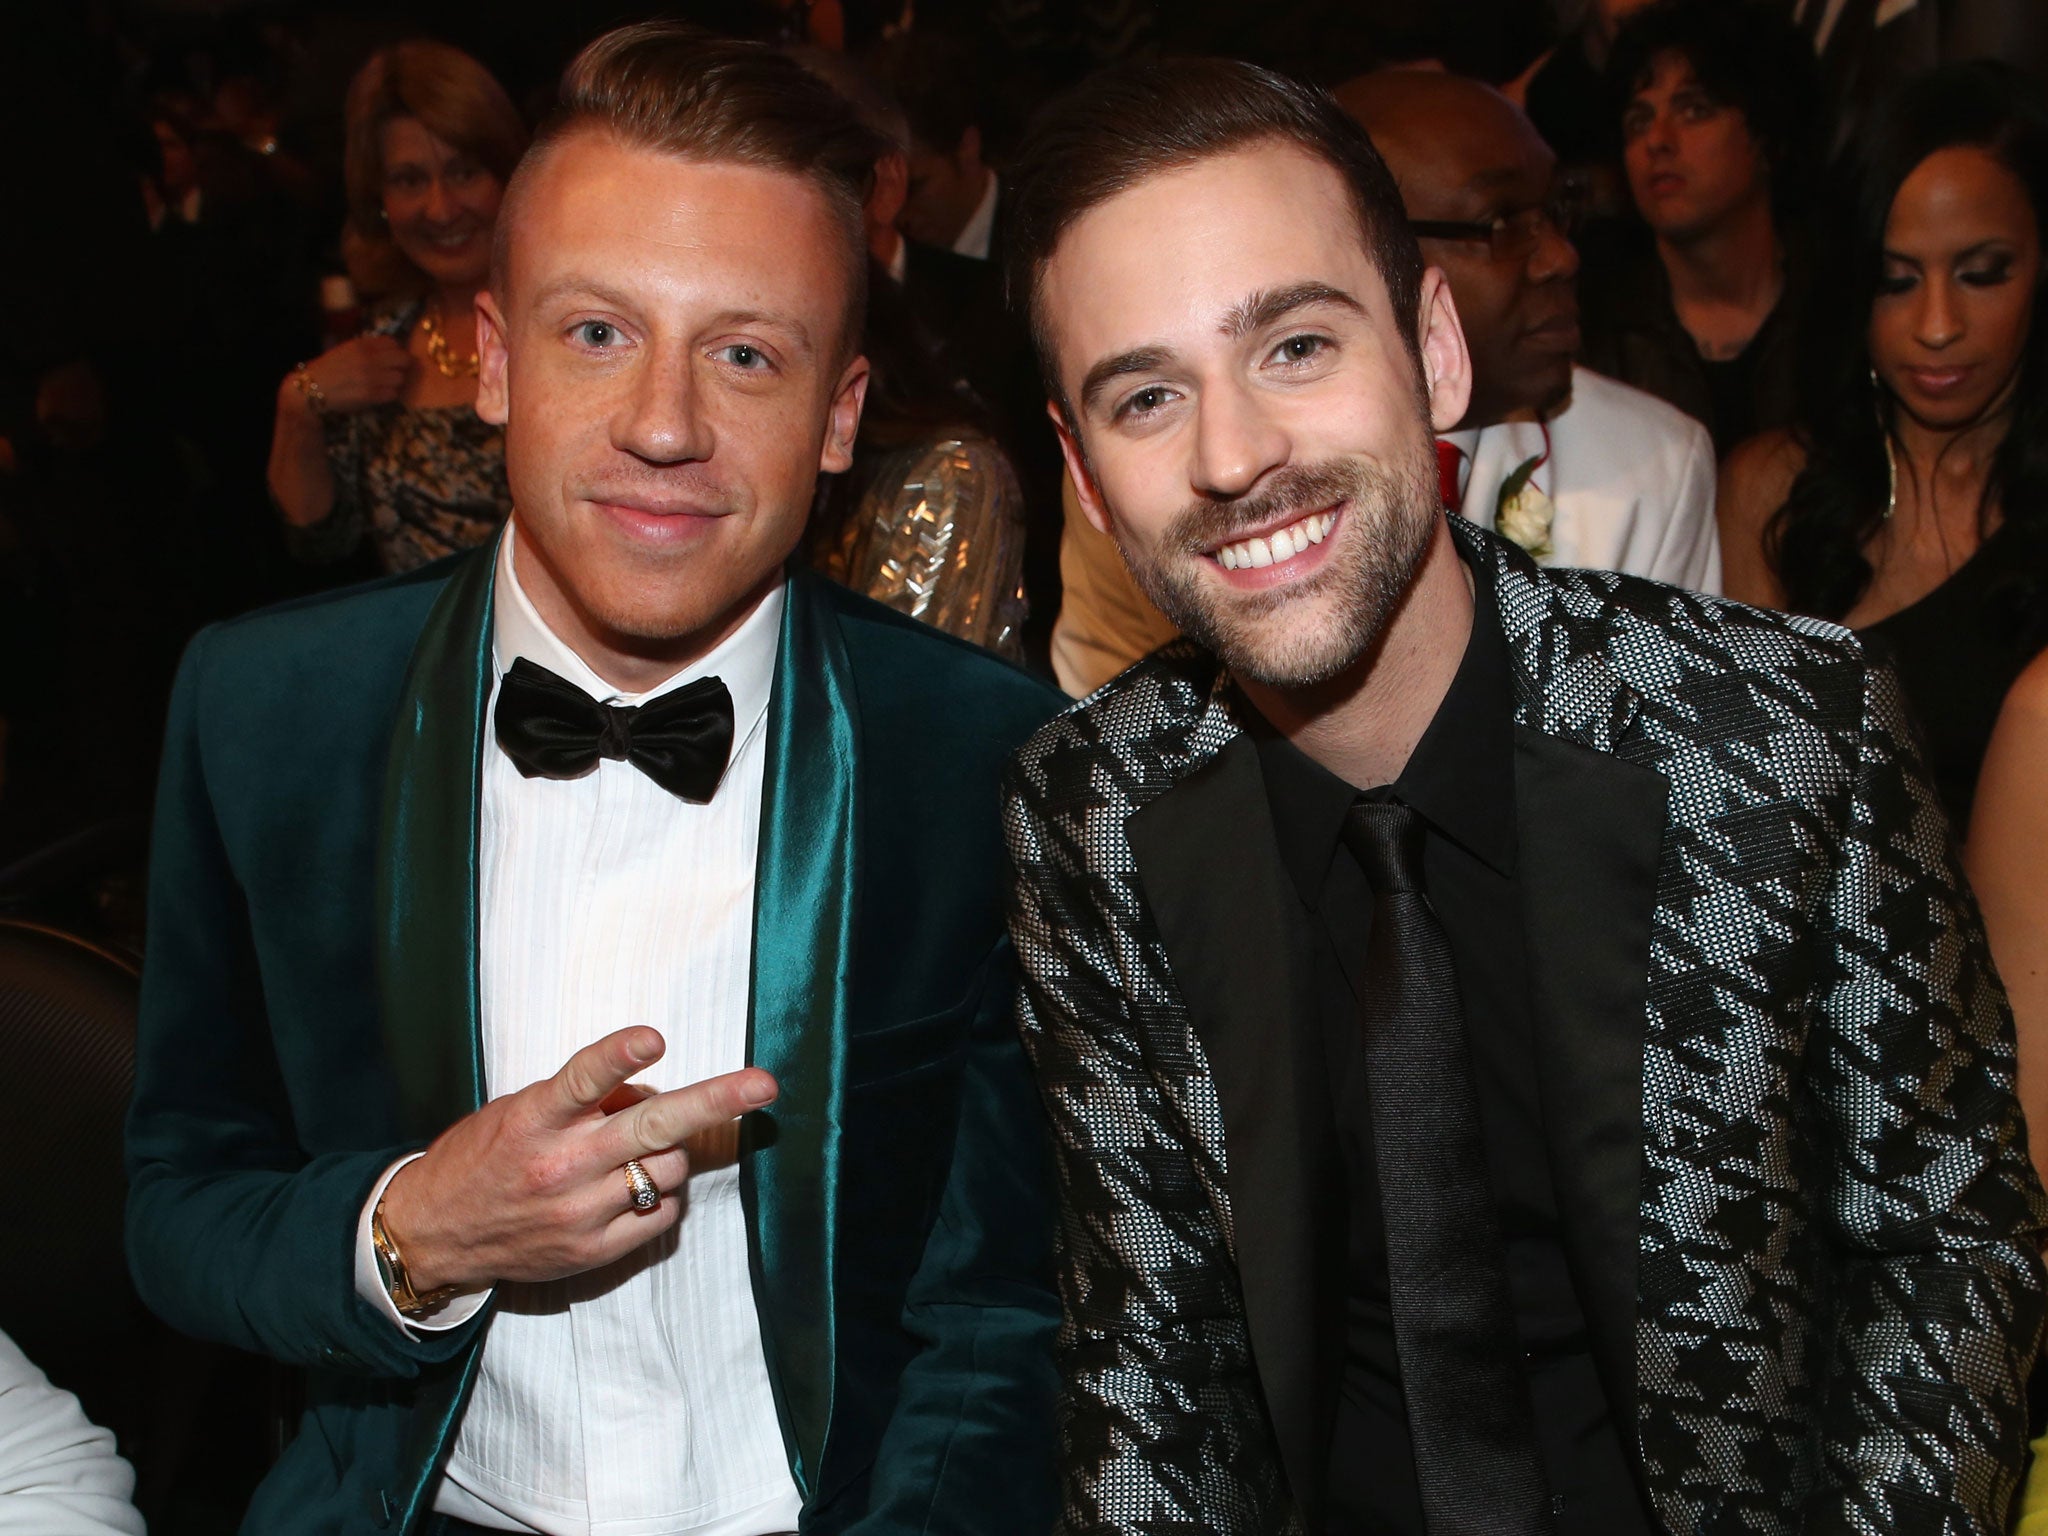 Macklemore and Ryan Lewis shifted more than 1.6m copies of hit tracks they had penned in 2013